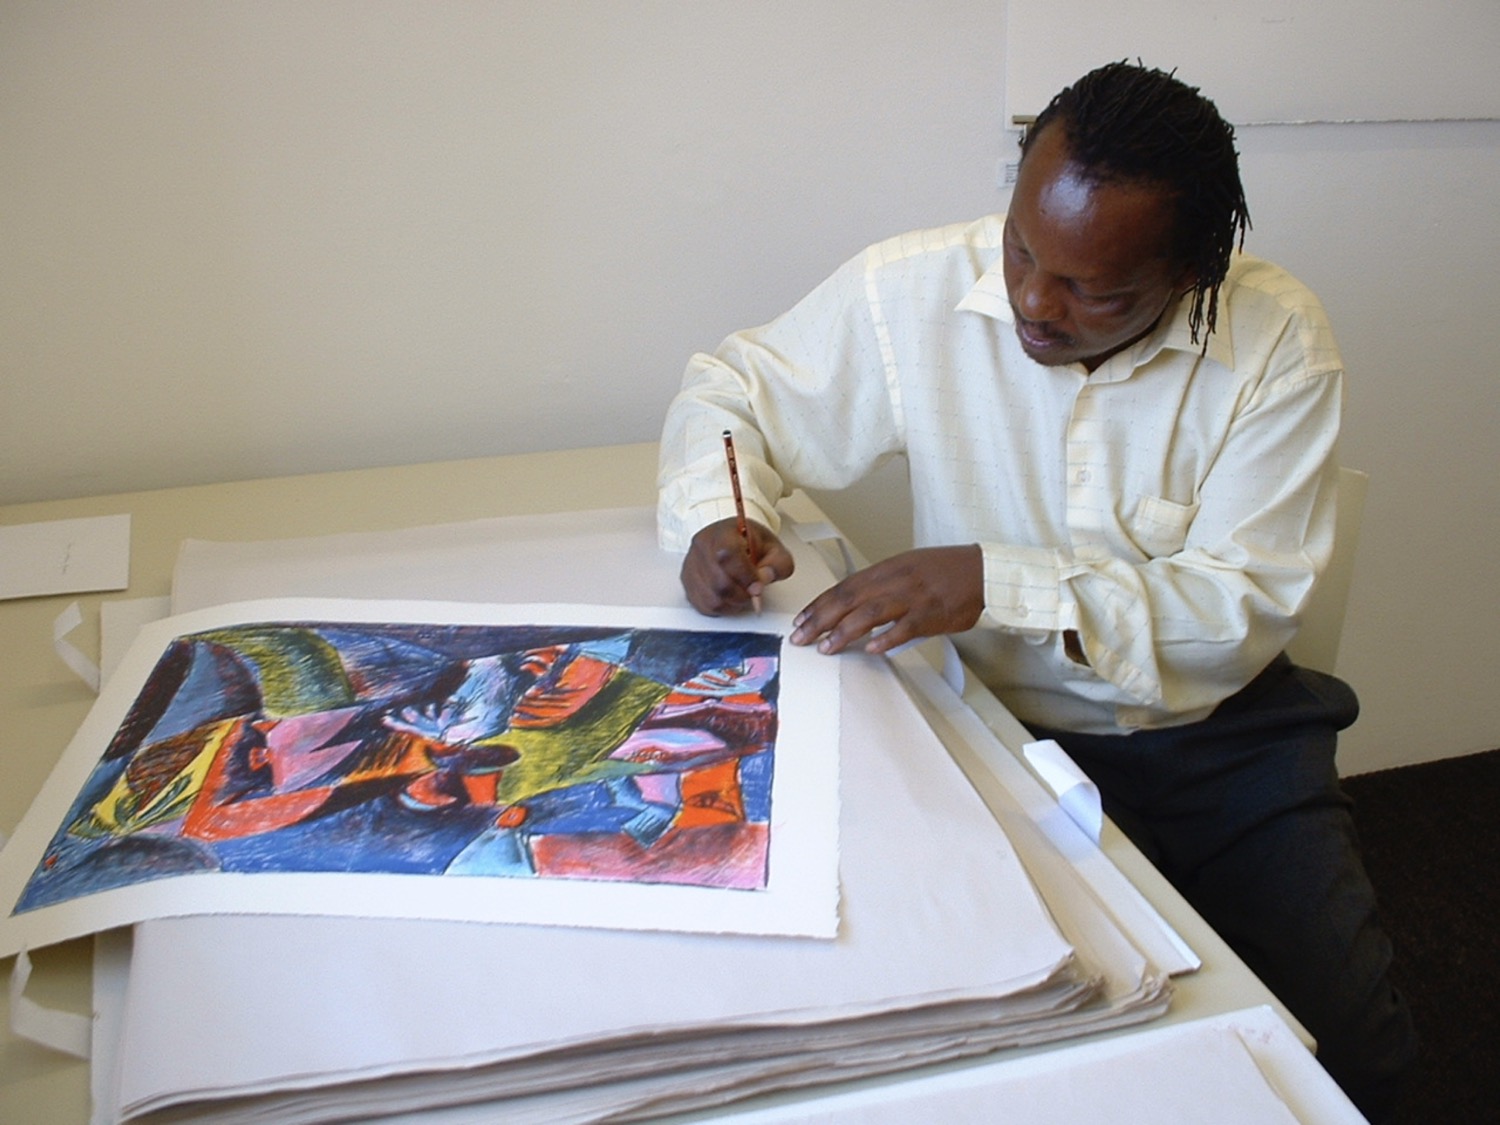 Lithographs by Tony Nkotsi who studied at Rorkes Drift (Kwazulu Natal) and taught at FUBA (Federated Union of Black Artists) in Johannesburg.